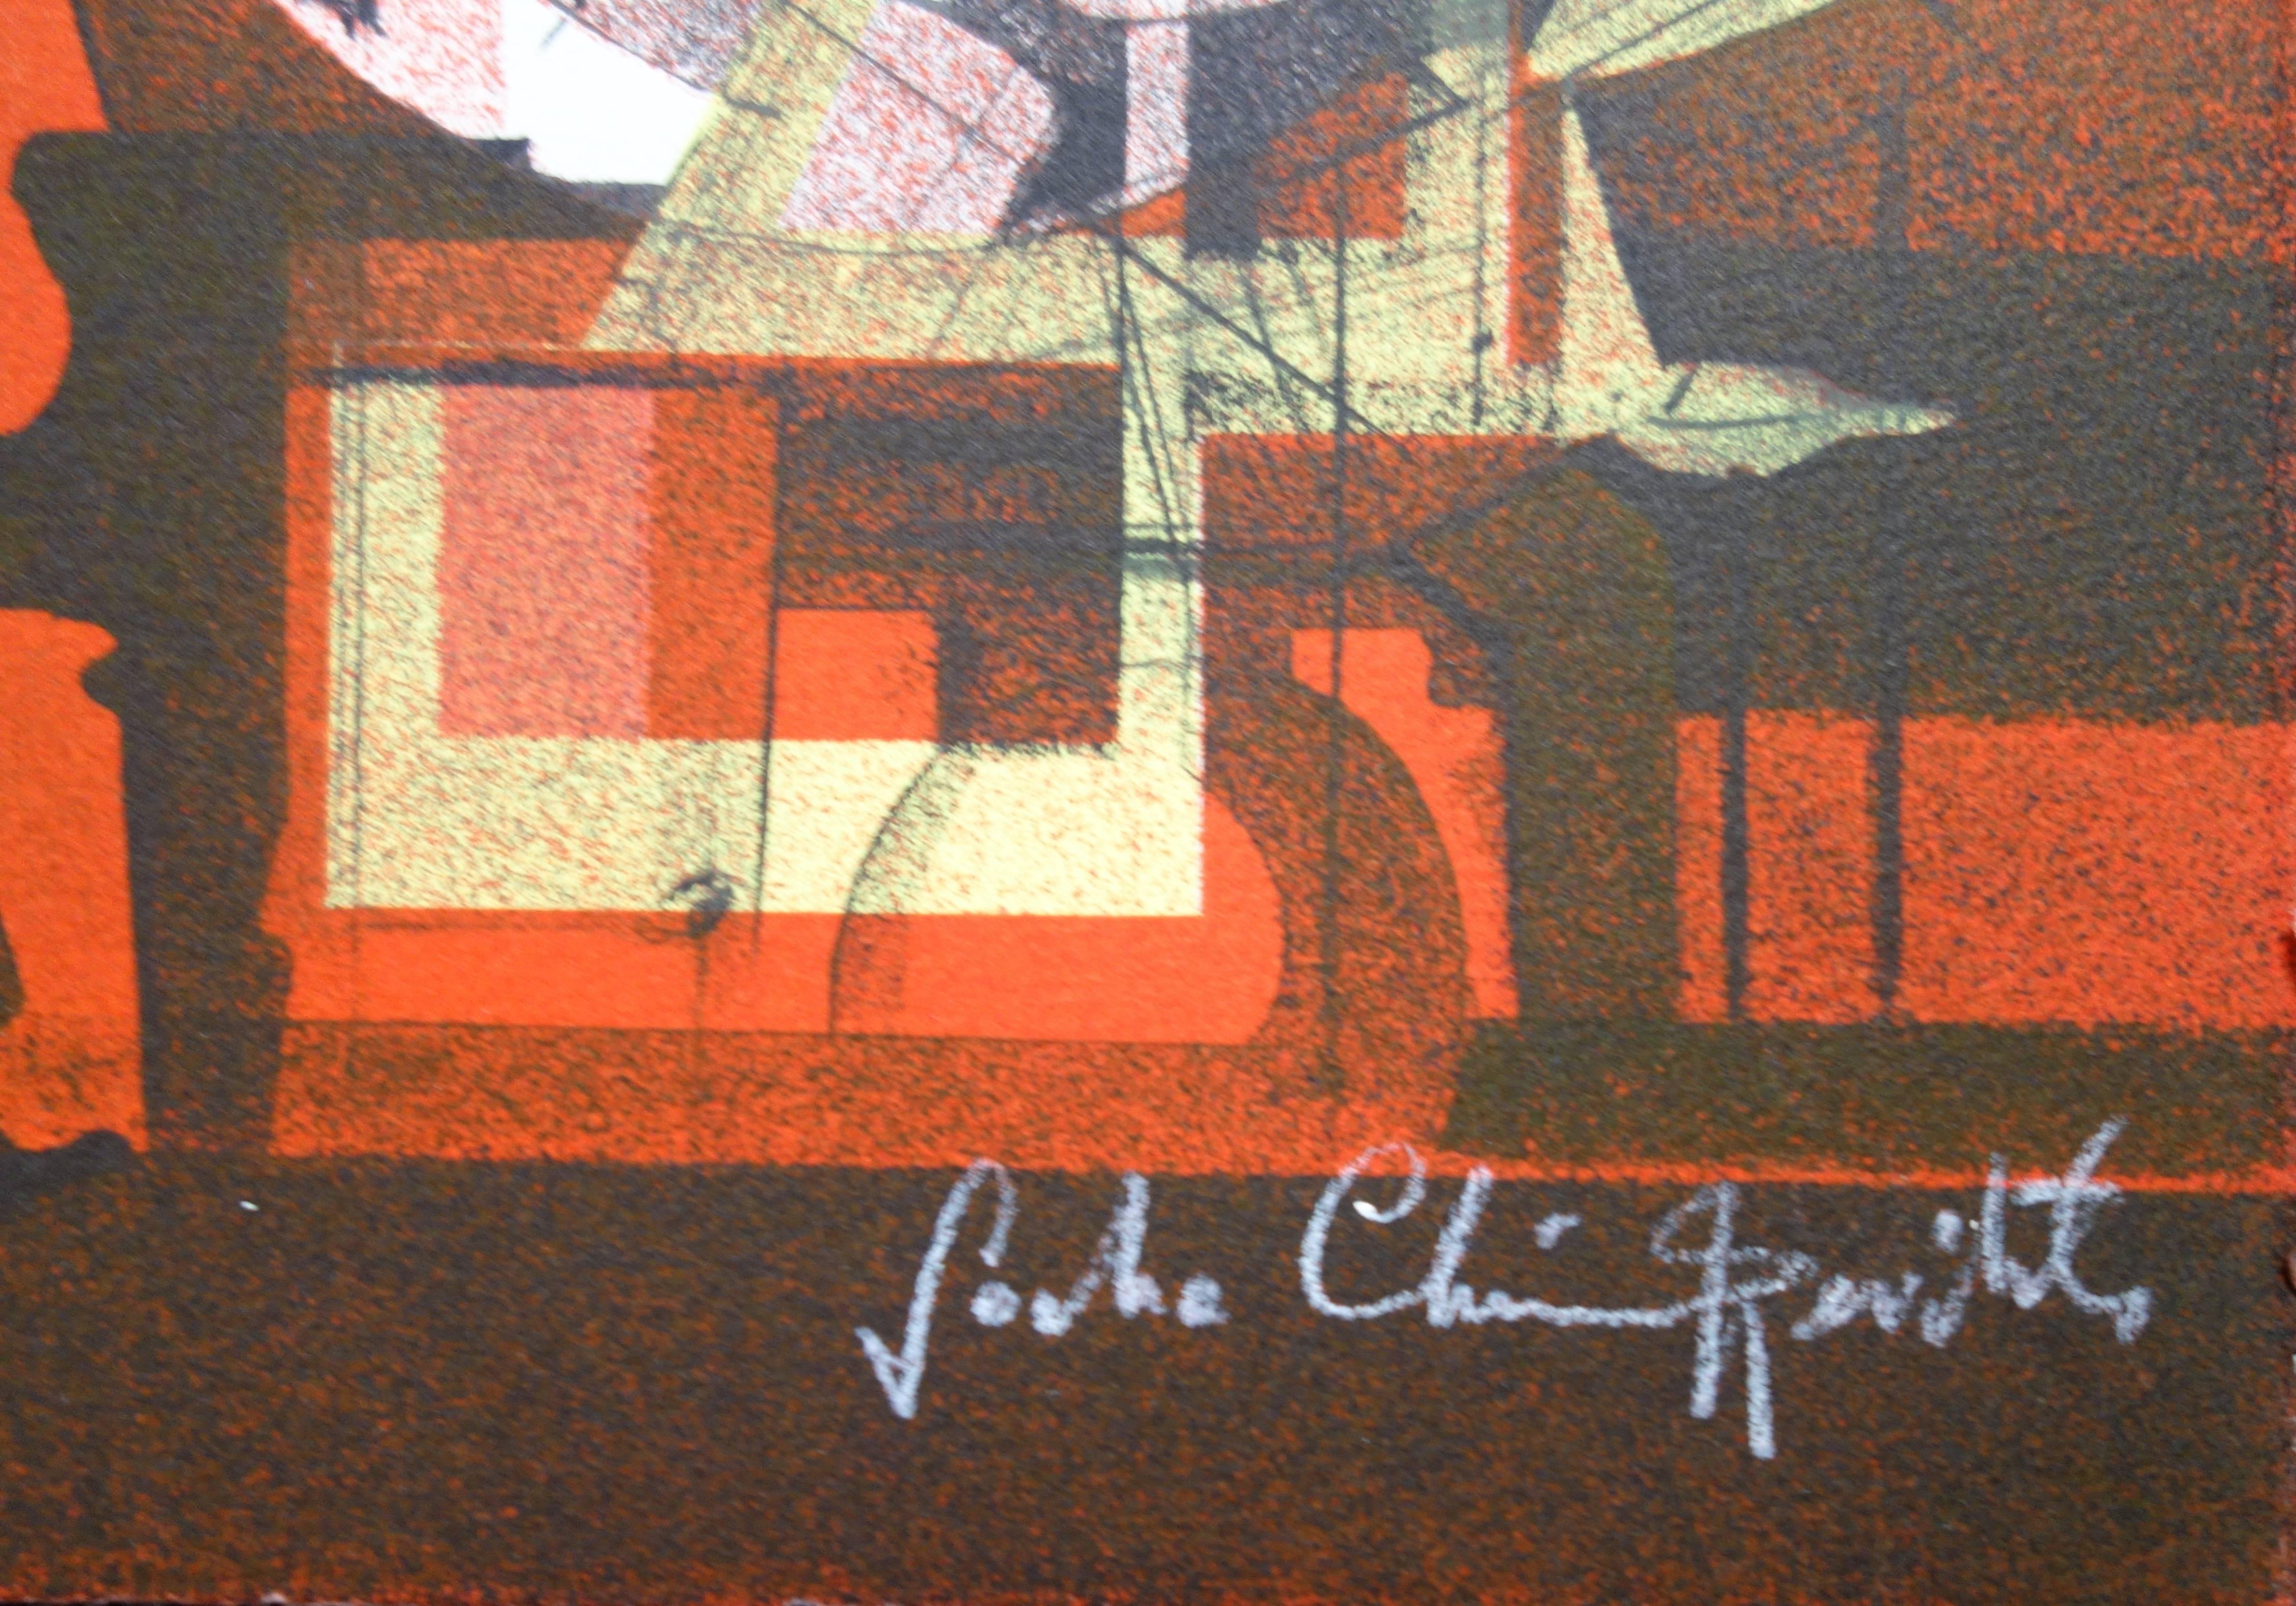 Jazz : Hot Swing- Original handsigned lithograph - Limited /275 - Print by Sacha Chimkevitch